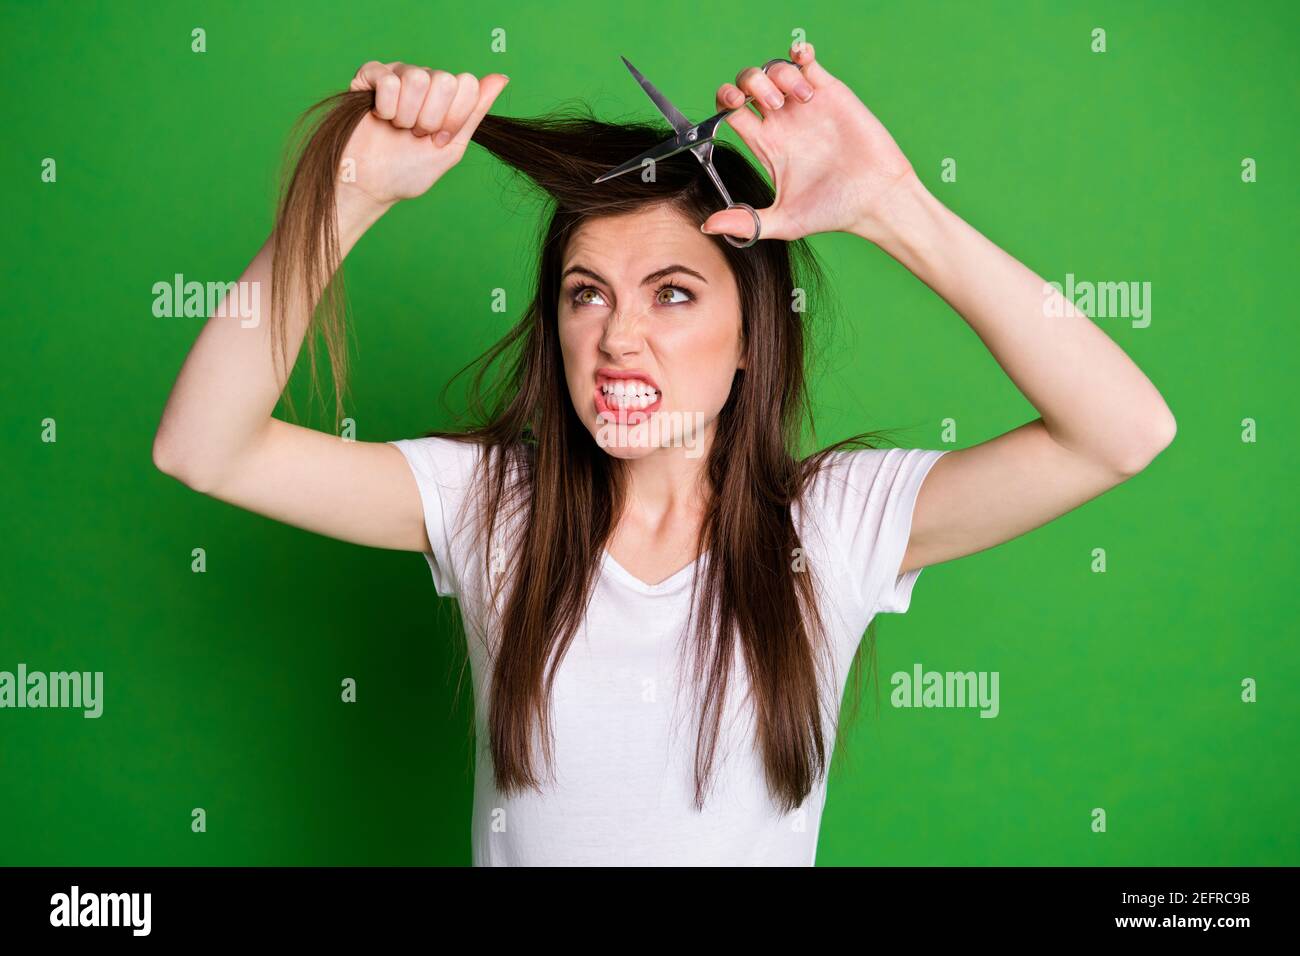 Photo portrait of angry woman cutting hair with scissors isolated on vivid green colored background Stock Photo